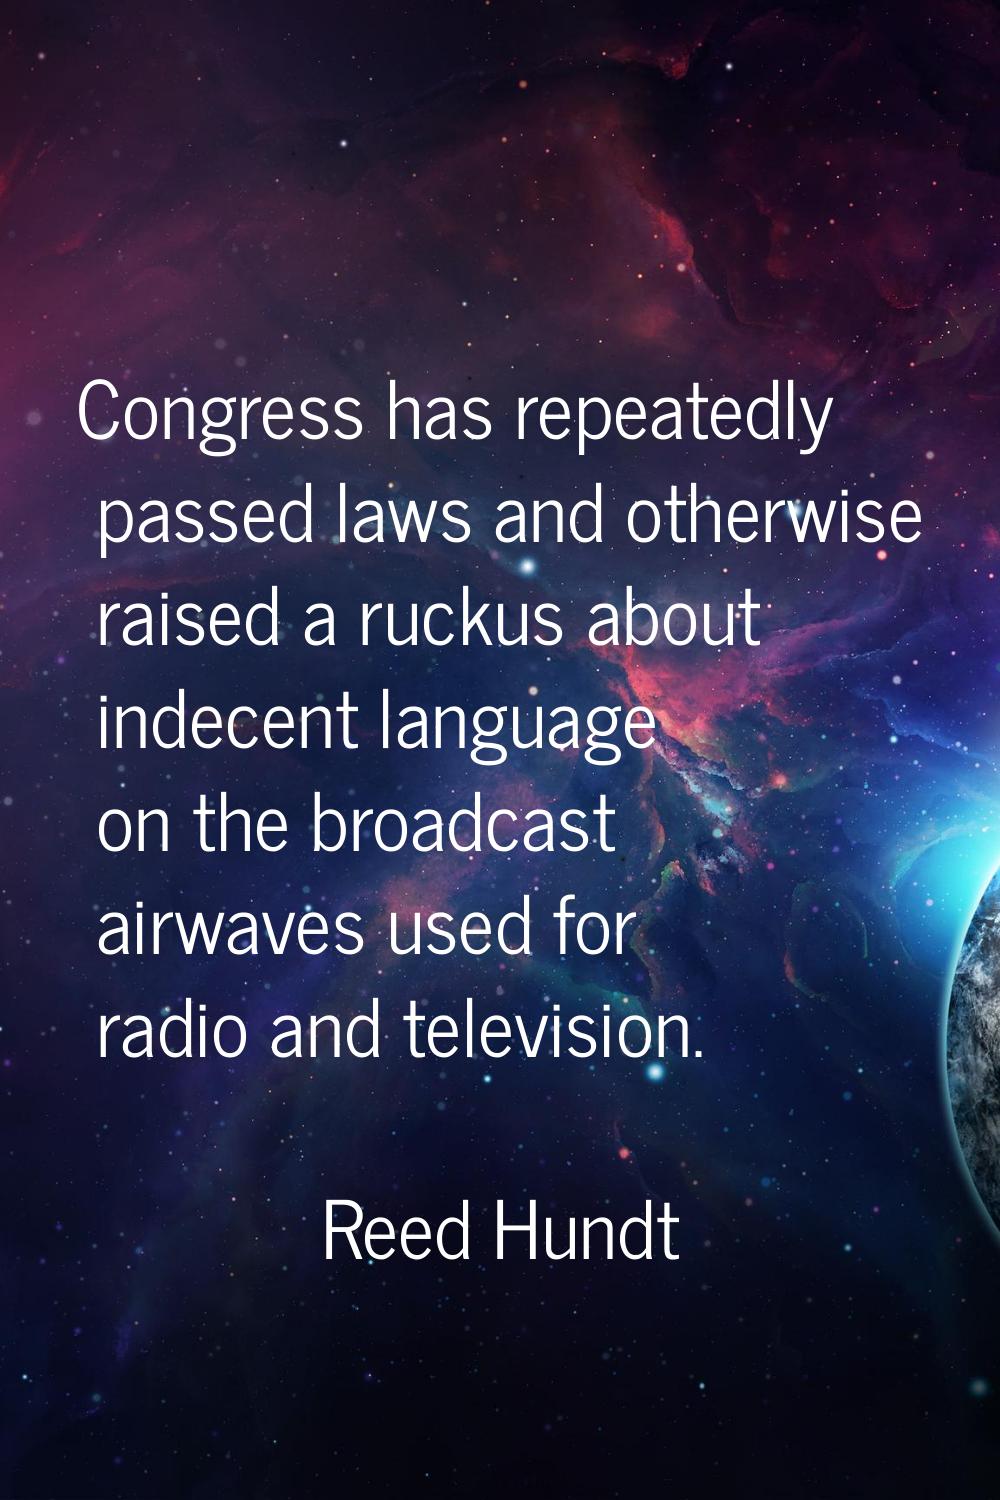 Congress has repeatedly passed laws and otherwise raised a ruckus about indecent language on the br